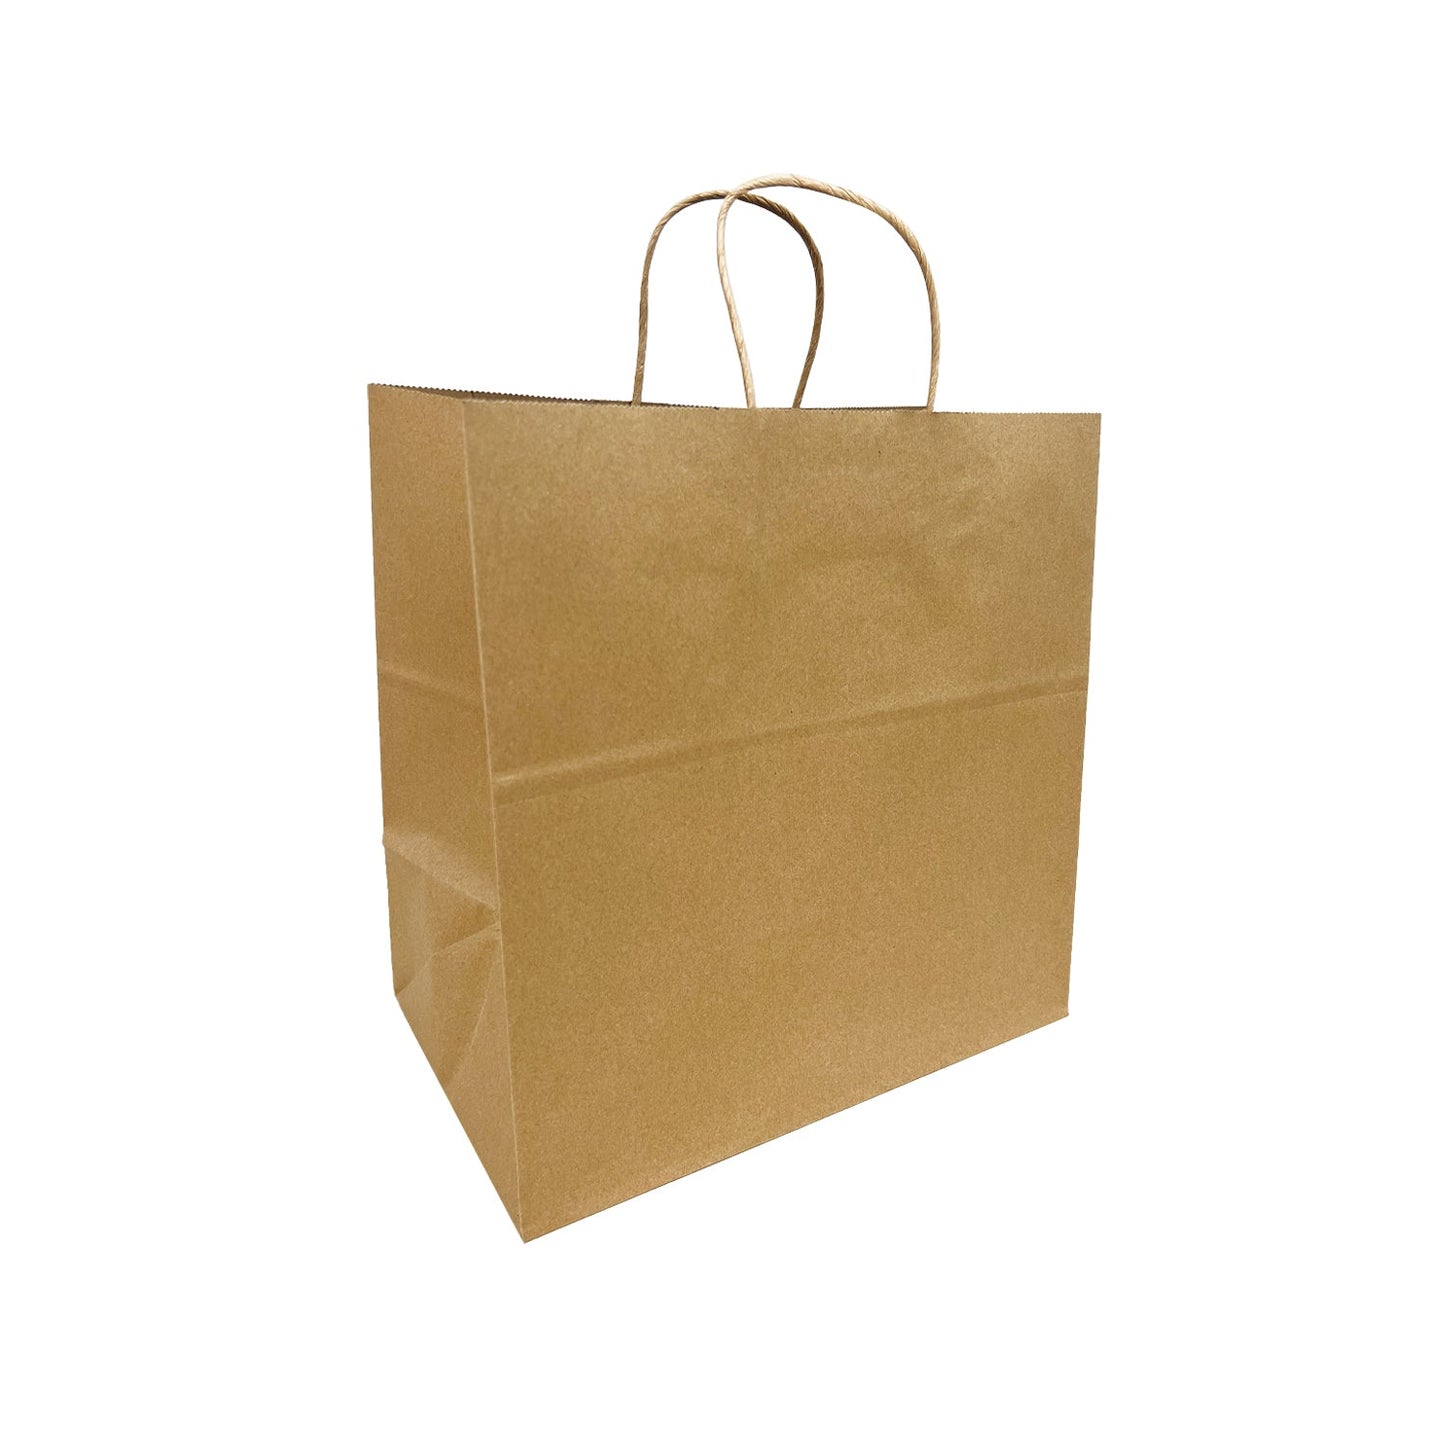 200pcs Take Out 13x8x13 inches Kraft Paper Bag Cardboard Insert with Twisted Handles, $0.43/pc